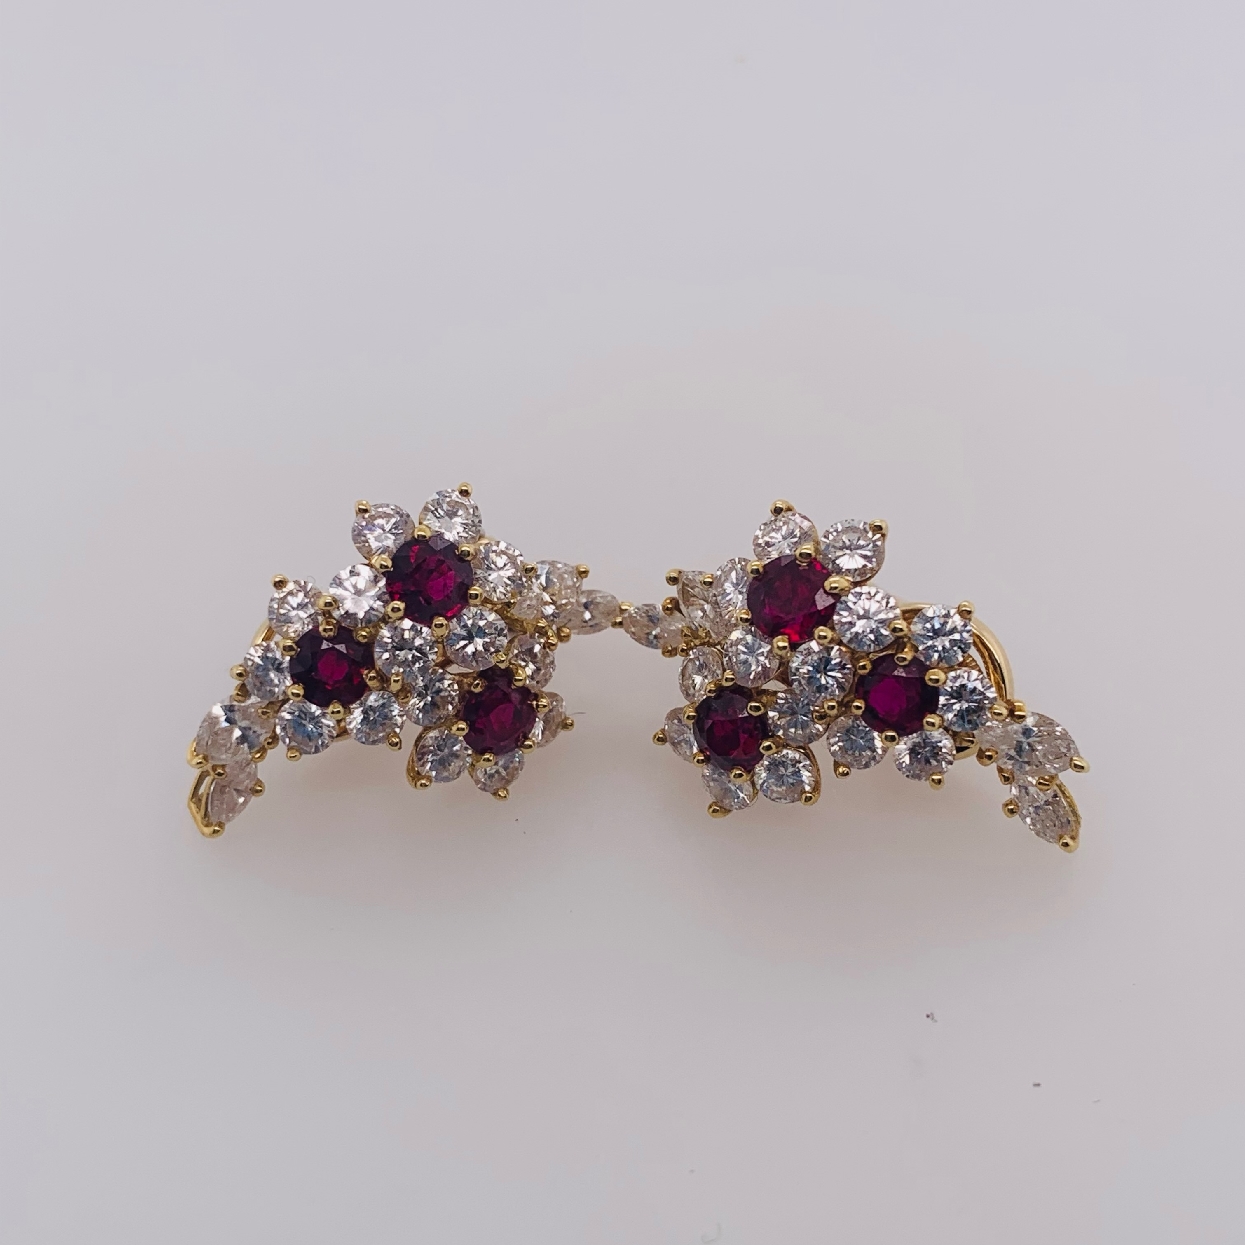 Tiffany & Co. 18K Yellow Gold Cluster Earrings with 3.42 CTTW Diamonds F/VS2 and 0.90 CTTW Rubies Omega Back Clip Ons 

Comes with Original Box and Appraisal